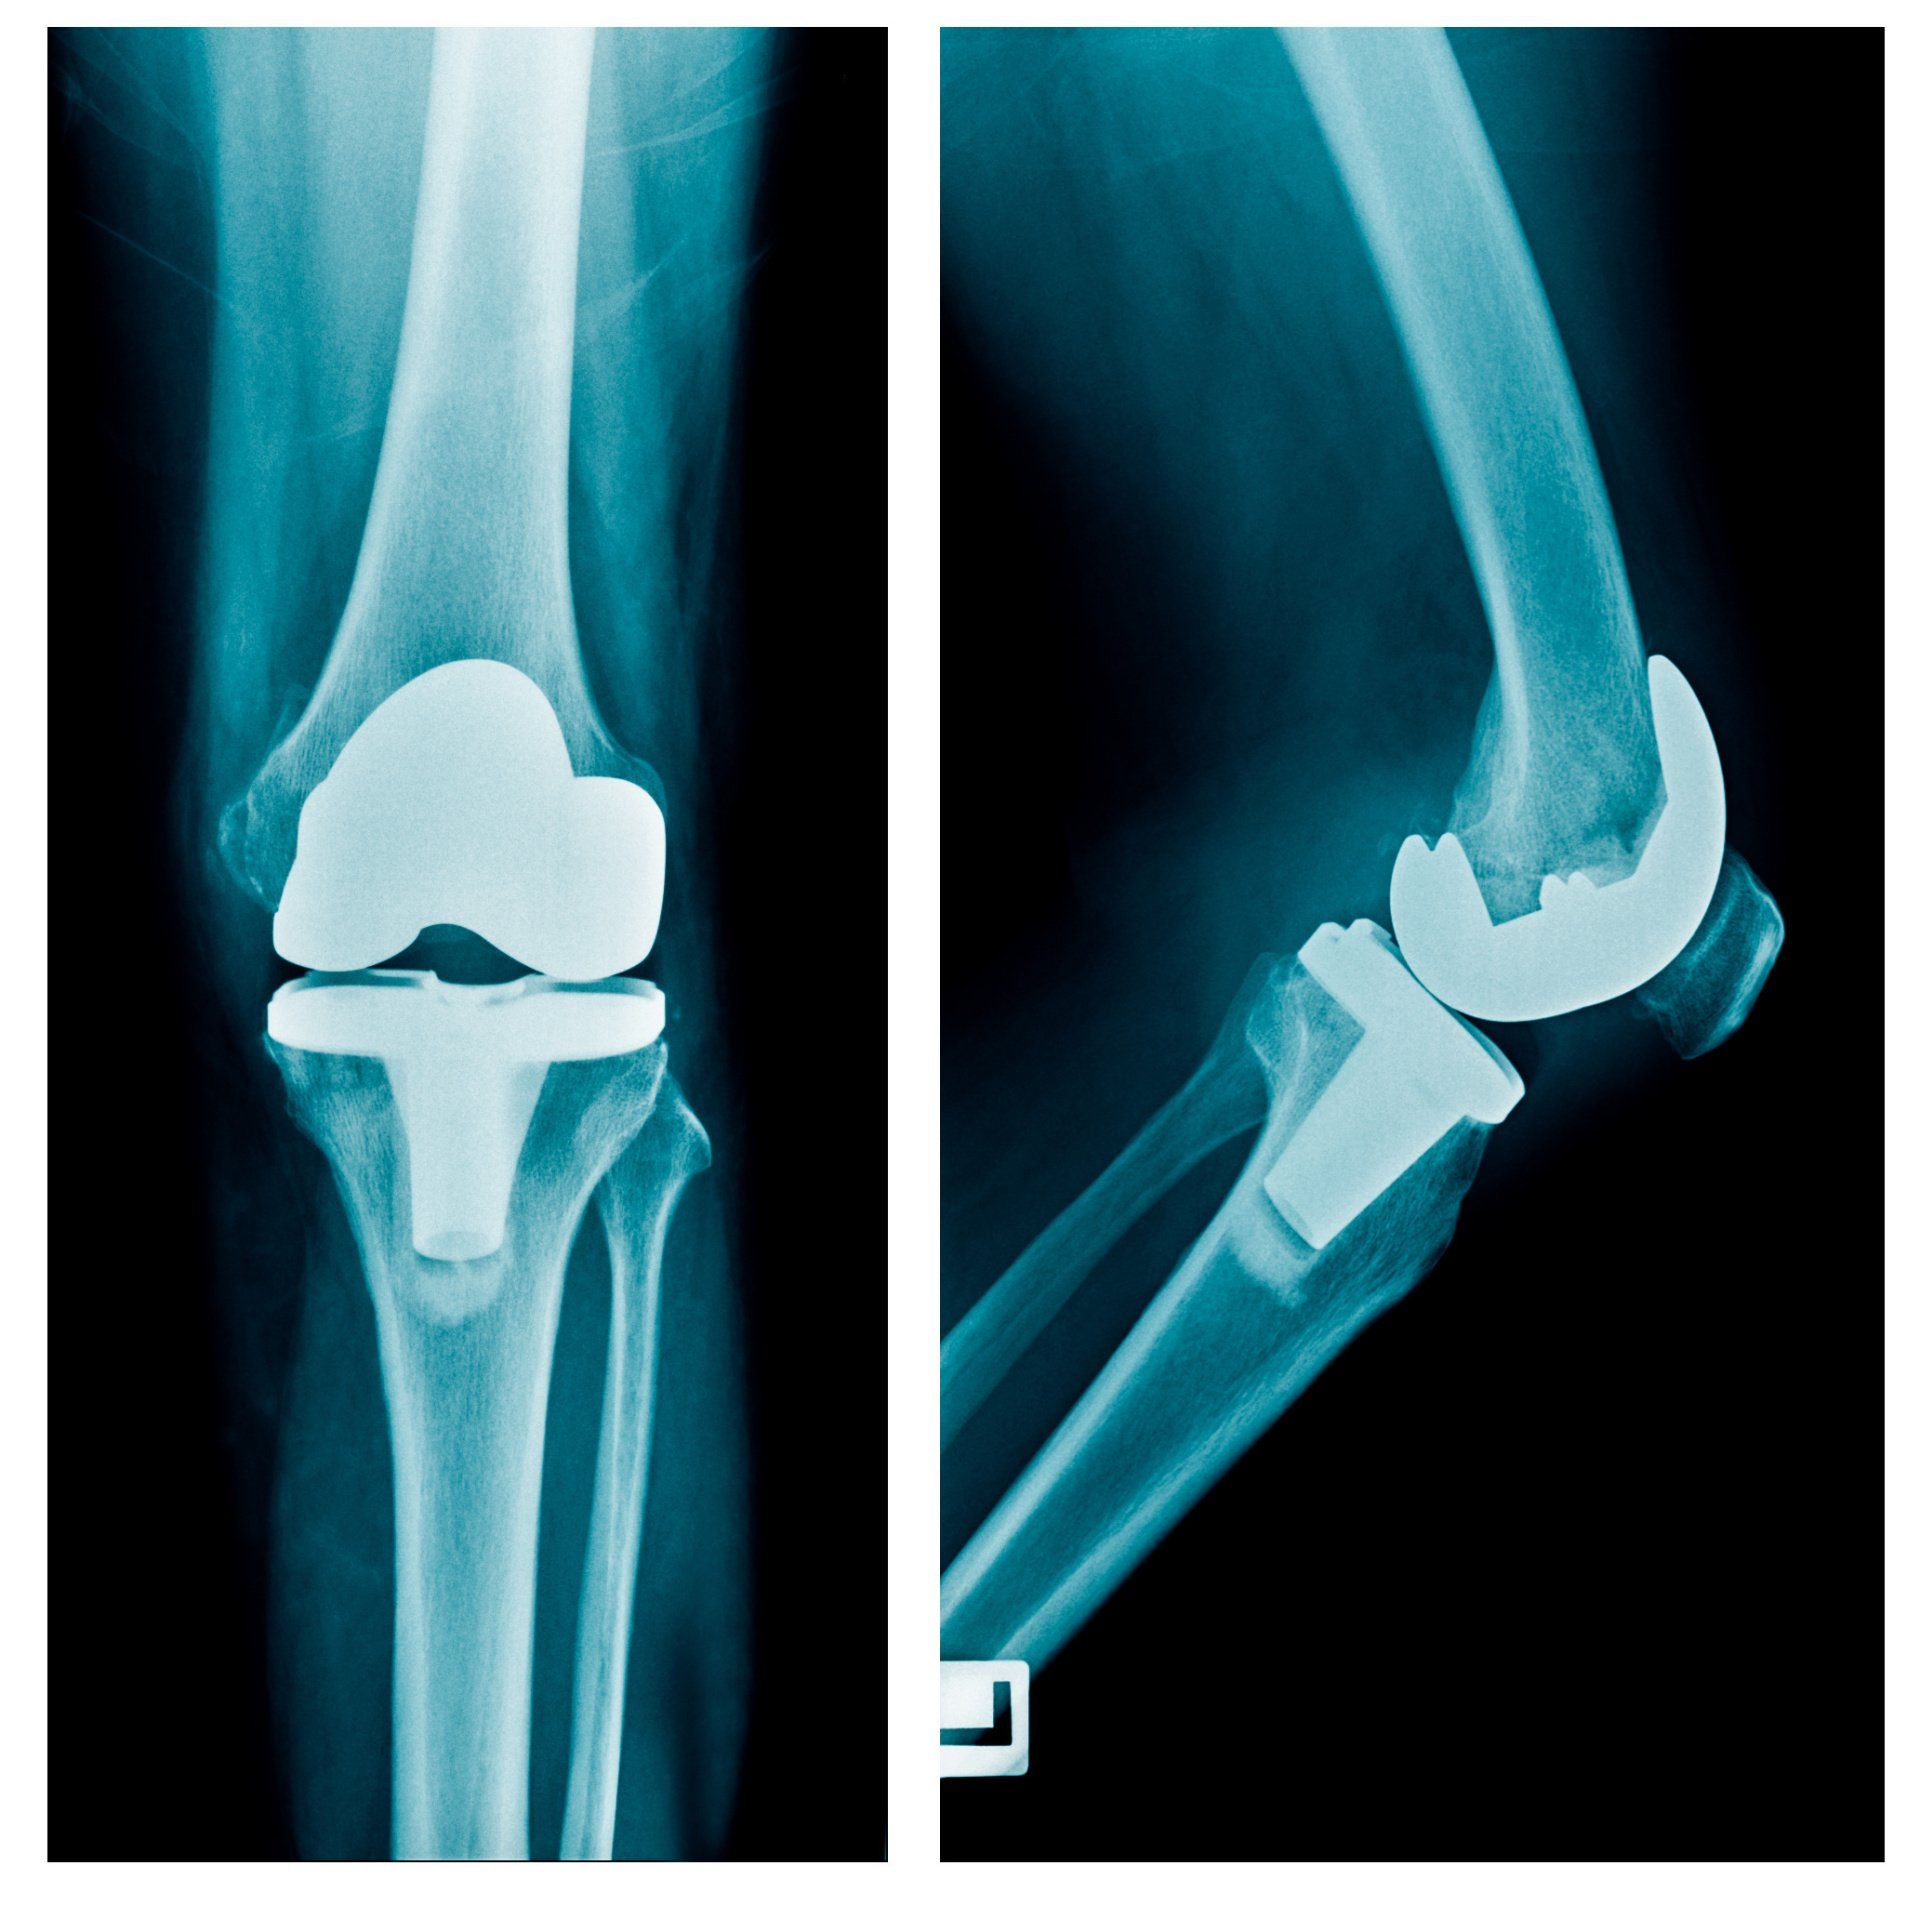 research article on knee replacements